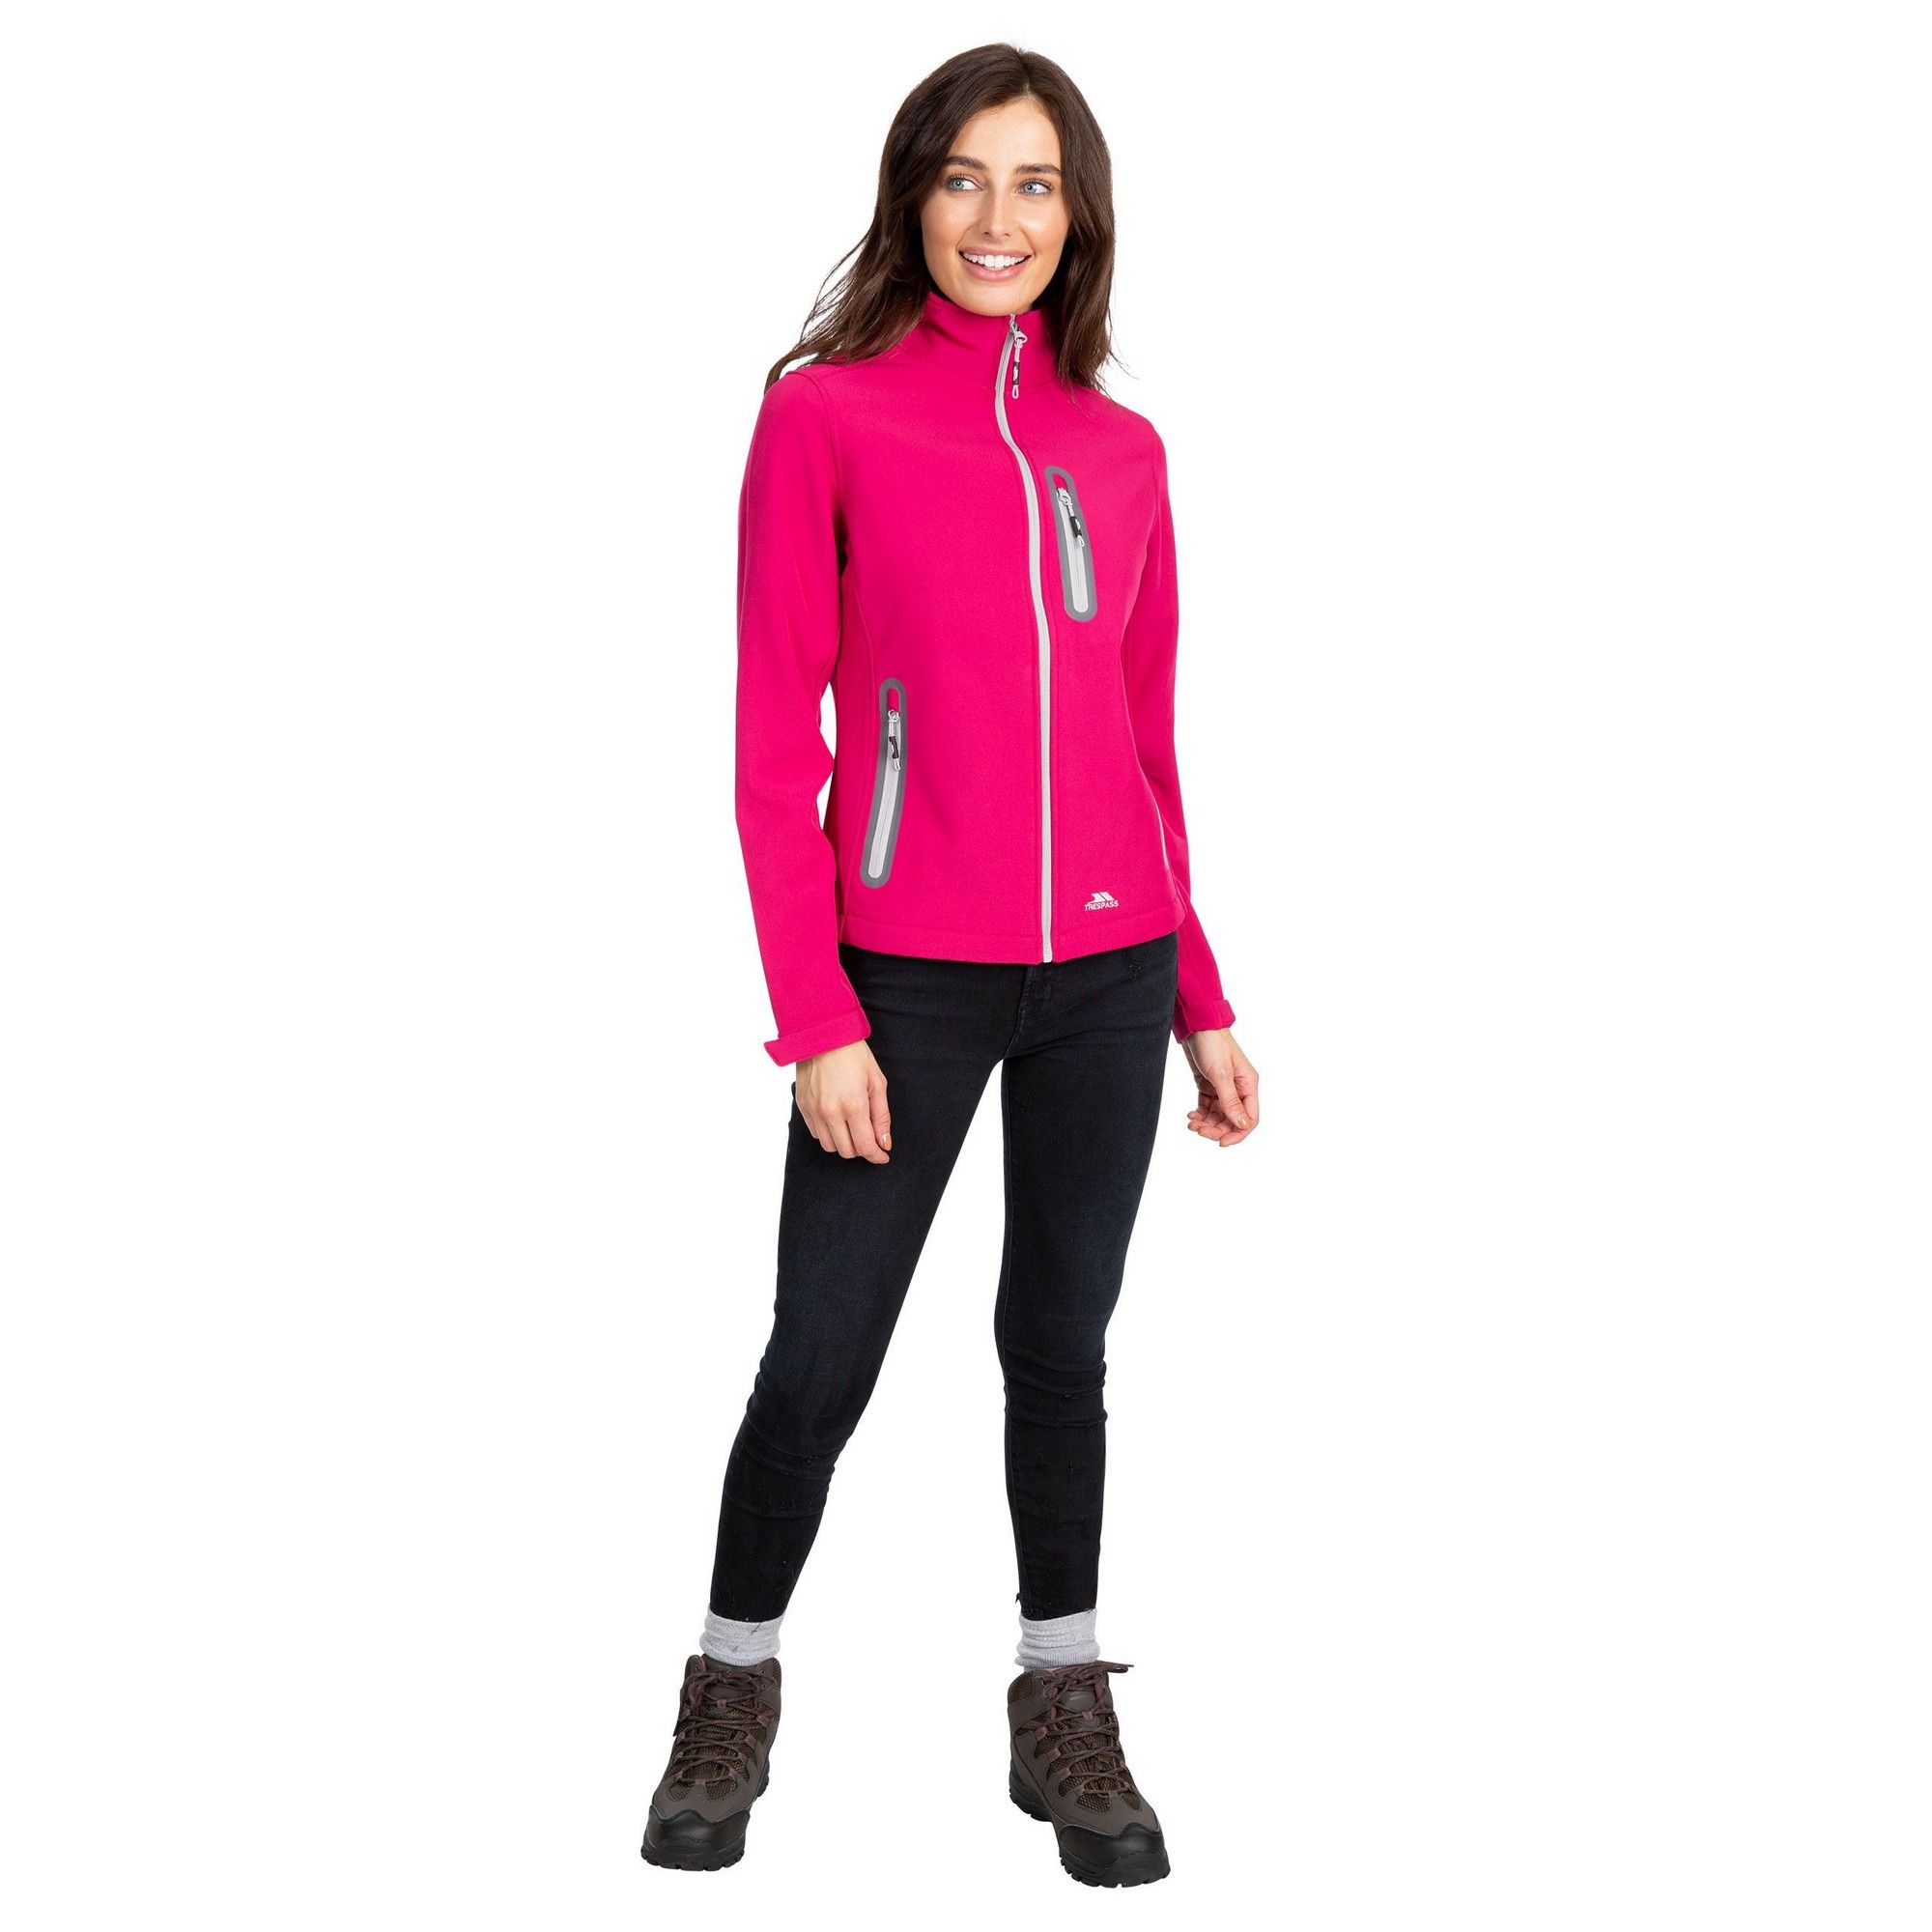 94% Polyester, 6% Elastane. 3 low profile zip pockets. Drawcord at hem. Flat cuff with tab adjuster. Chest size: xs (32in), s (34in), m (36in), l (38in), xl (40in), xxl (42in).